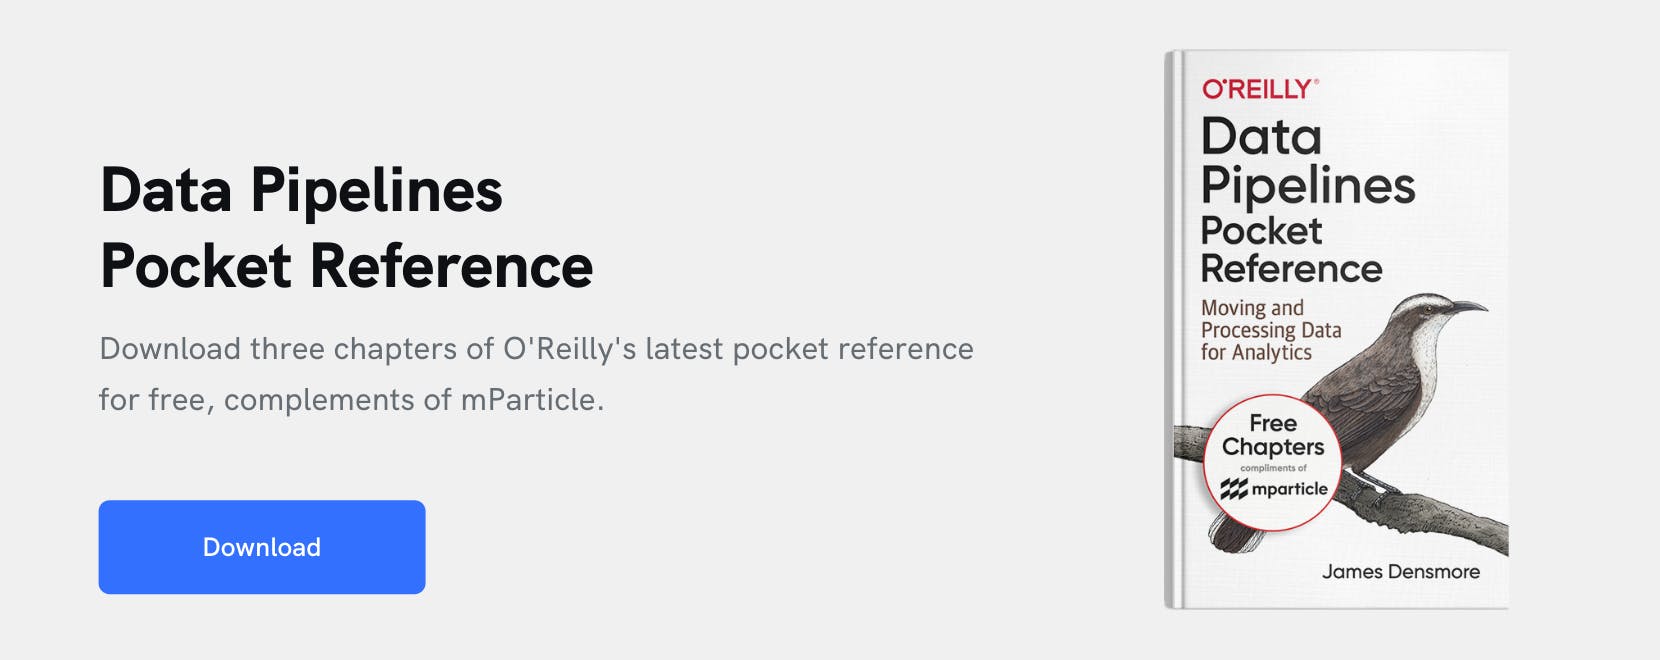 oreilly-data-pipelines-pocket-reference